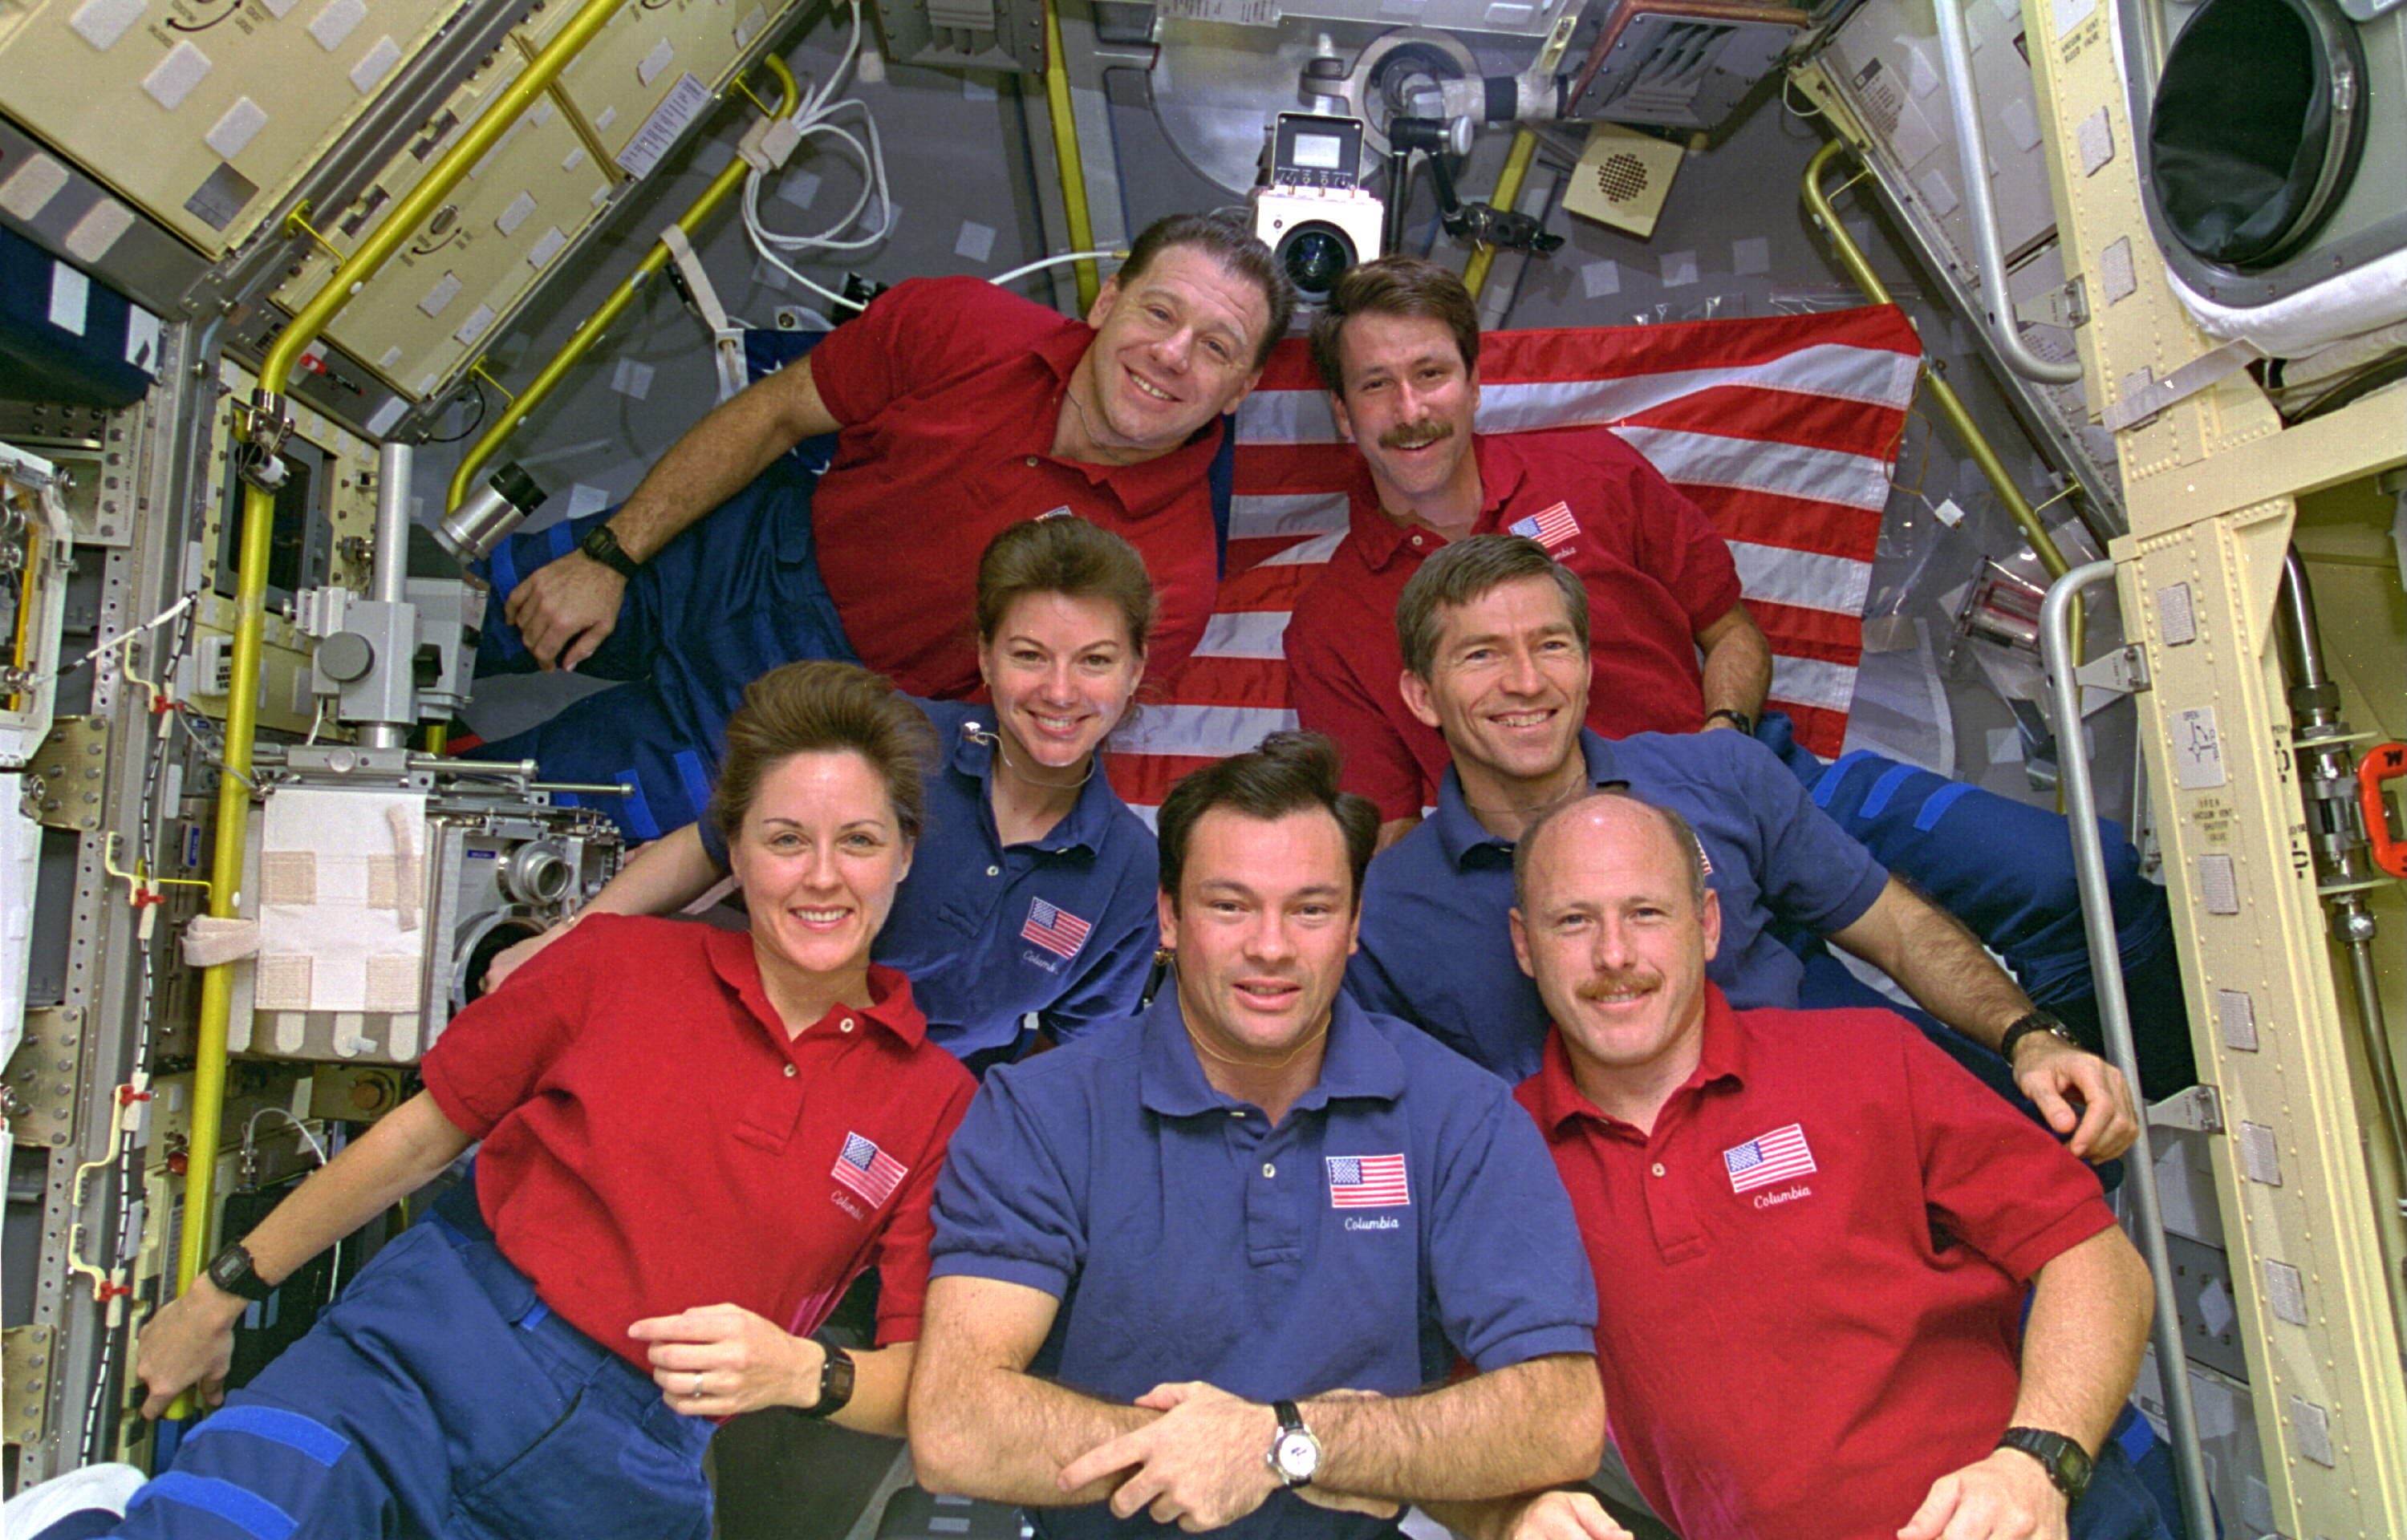 Michael E. Lopez-Alegria with the rest of the STS-73 crew inside the Spacelab module.